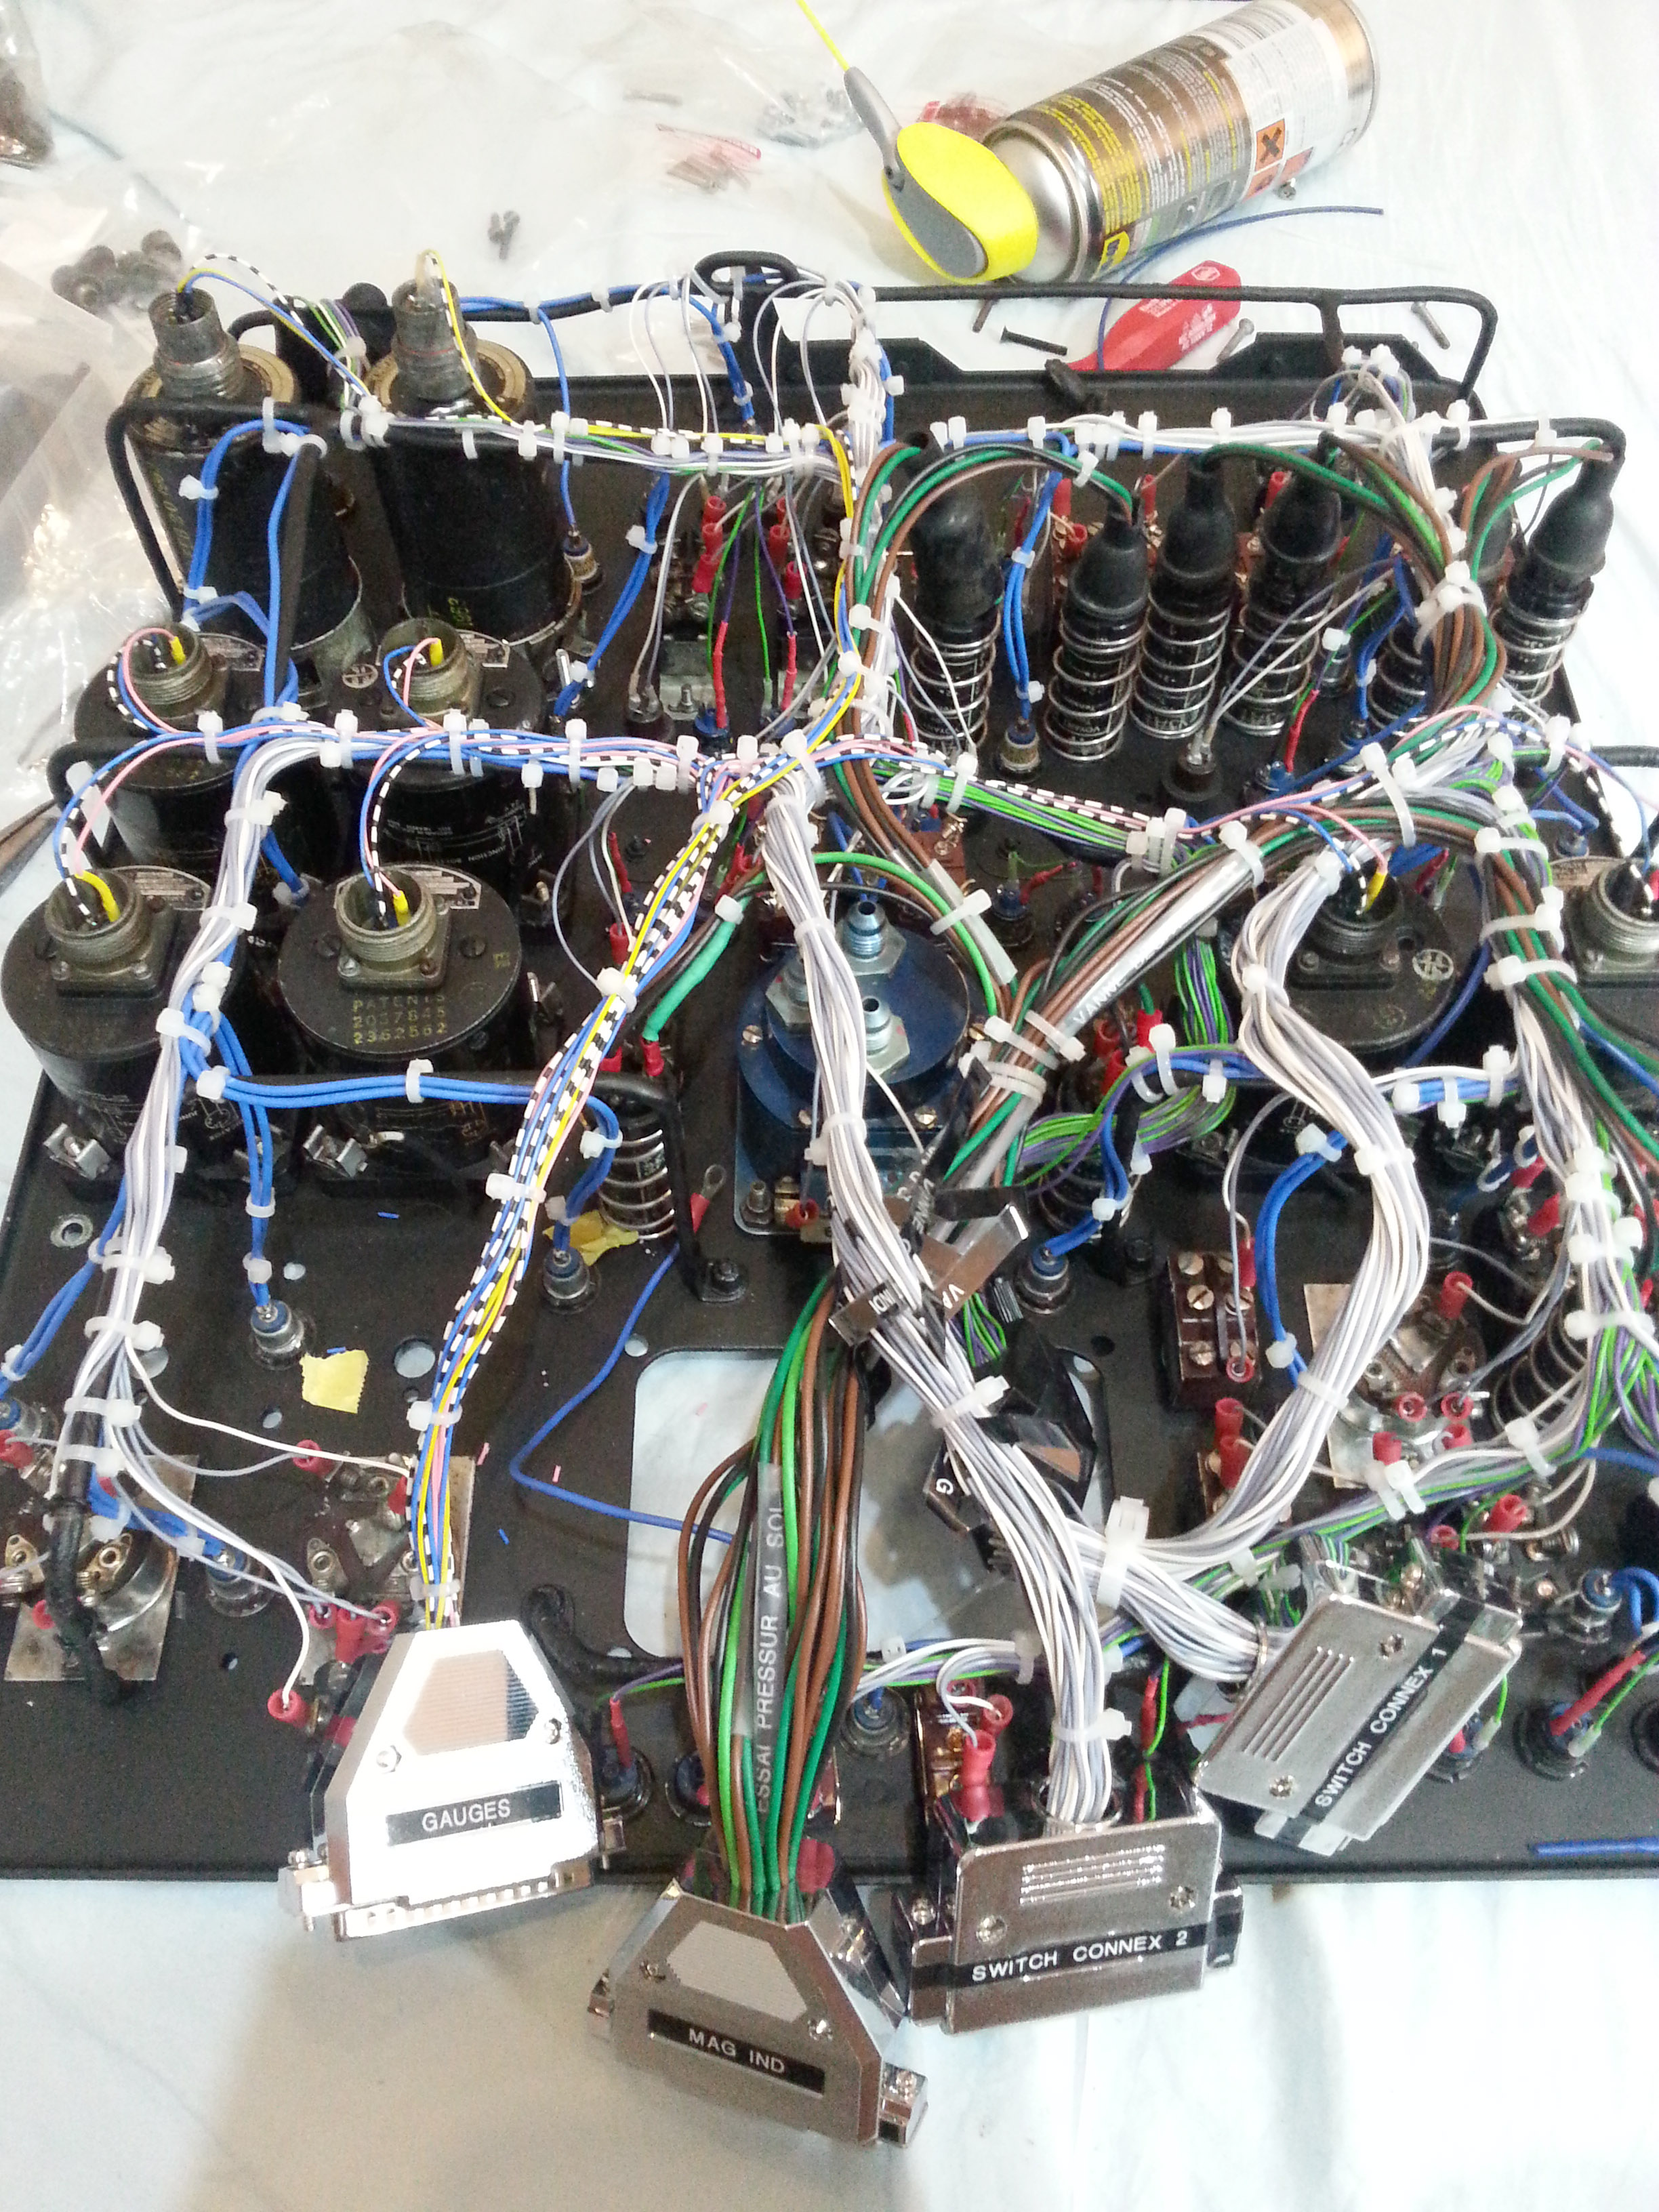 An image showing the complexity of the wiring that Nils Andersson had to redo. (photo via Nils Andersson)